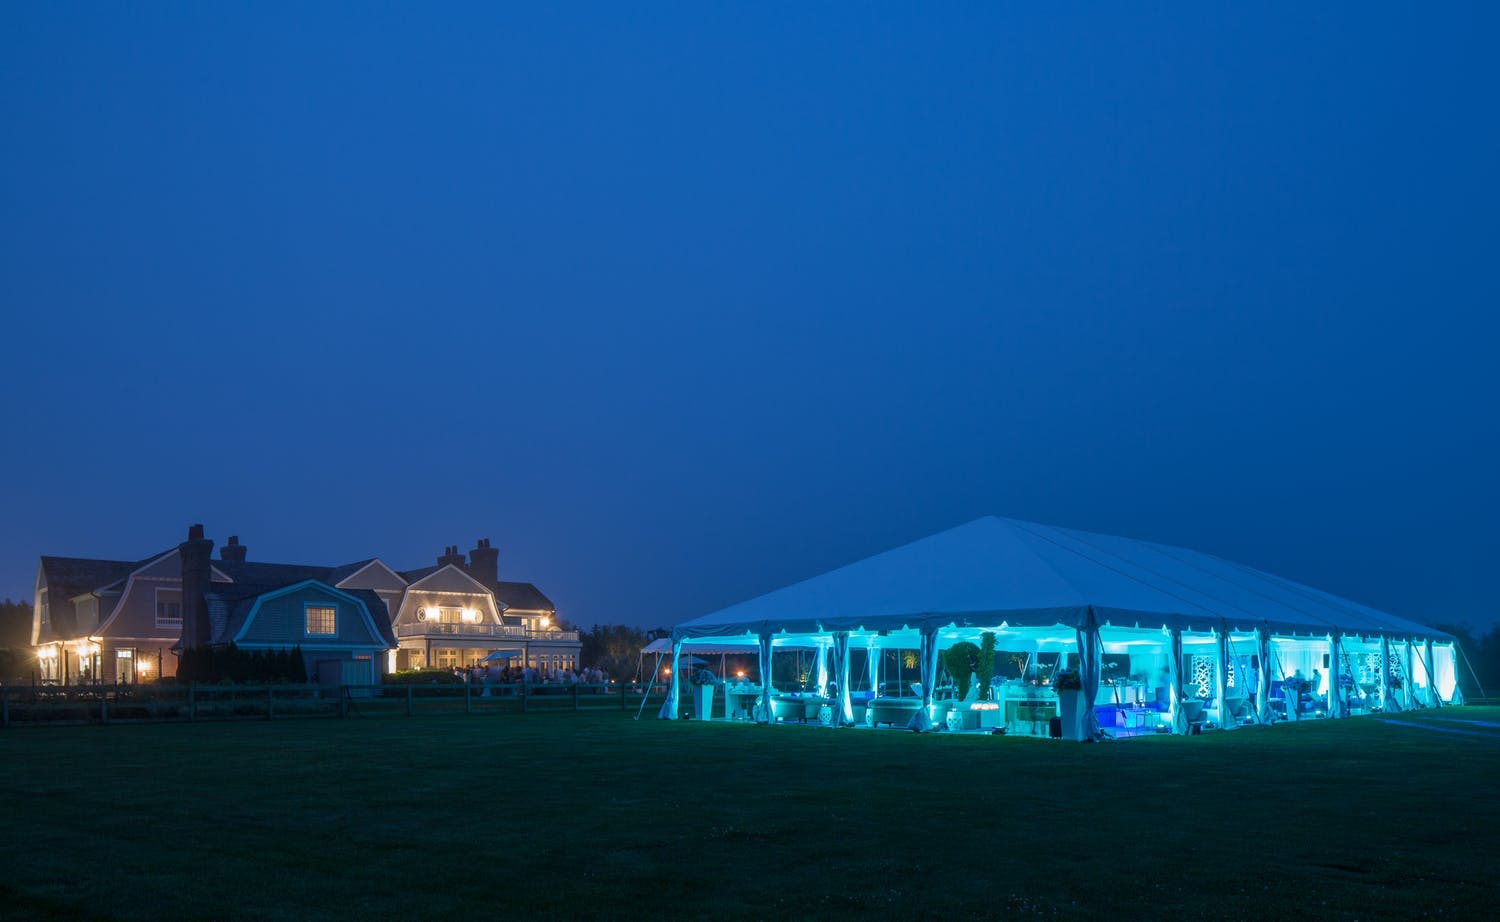 Tented 30th-wedding anniversary with blue uplighting at night | PartySlate